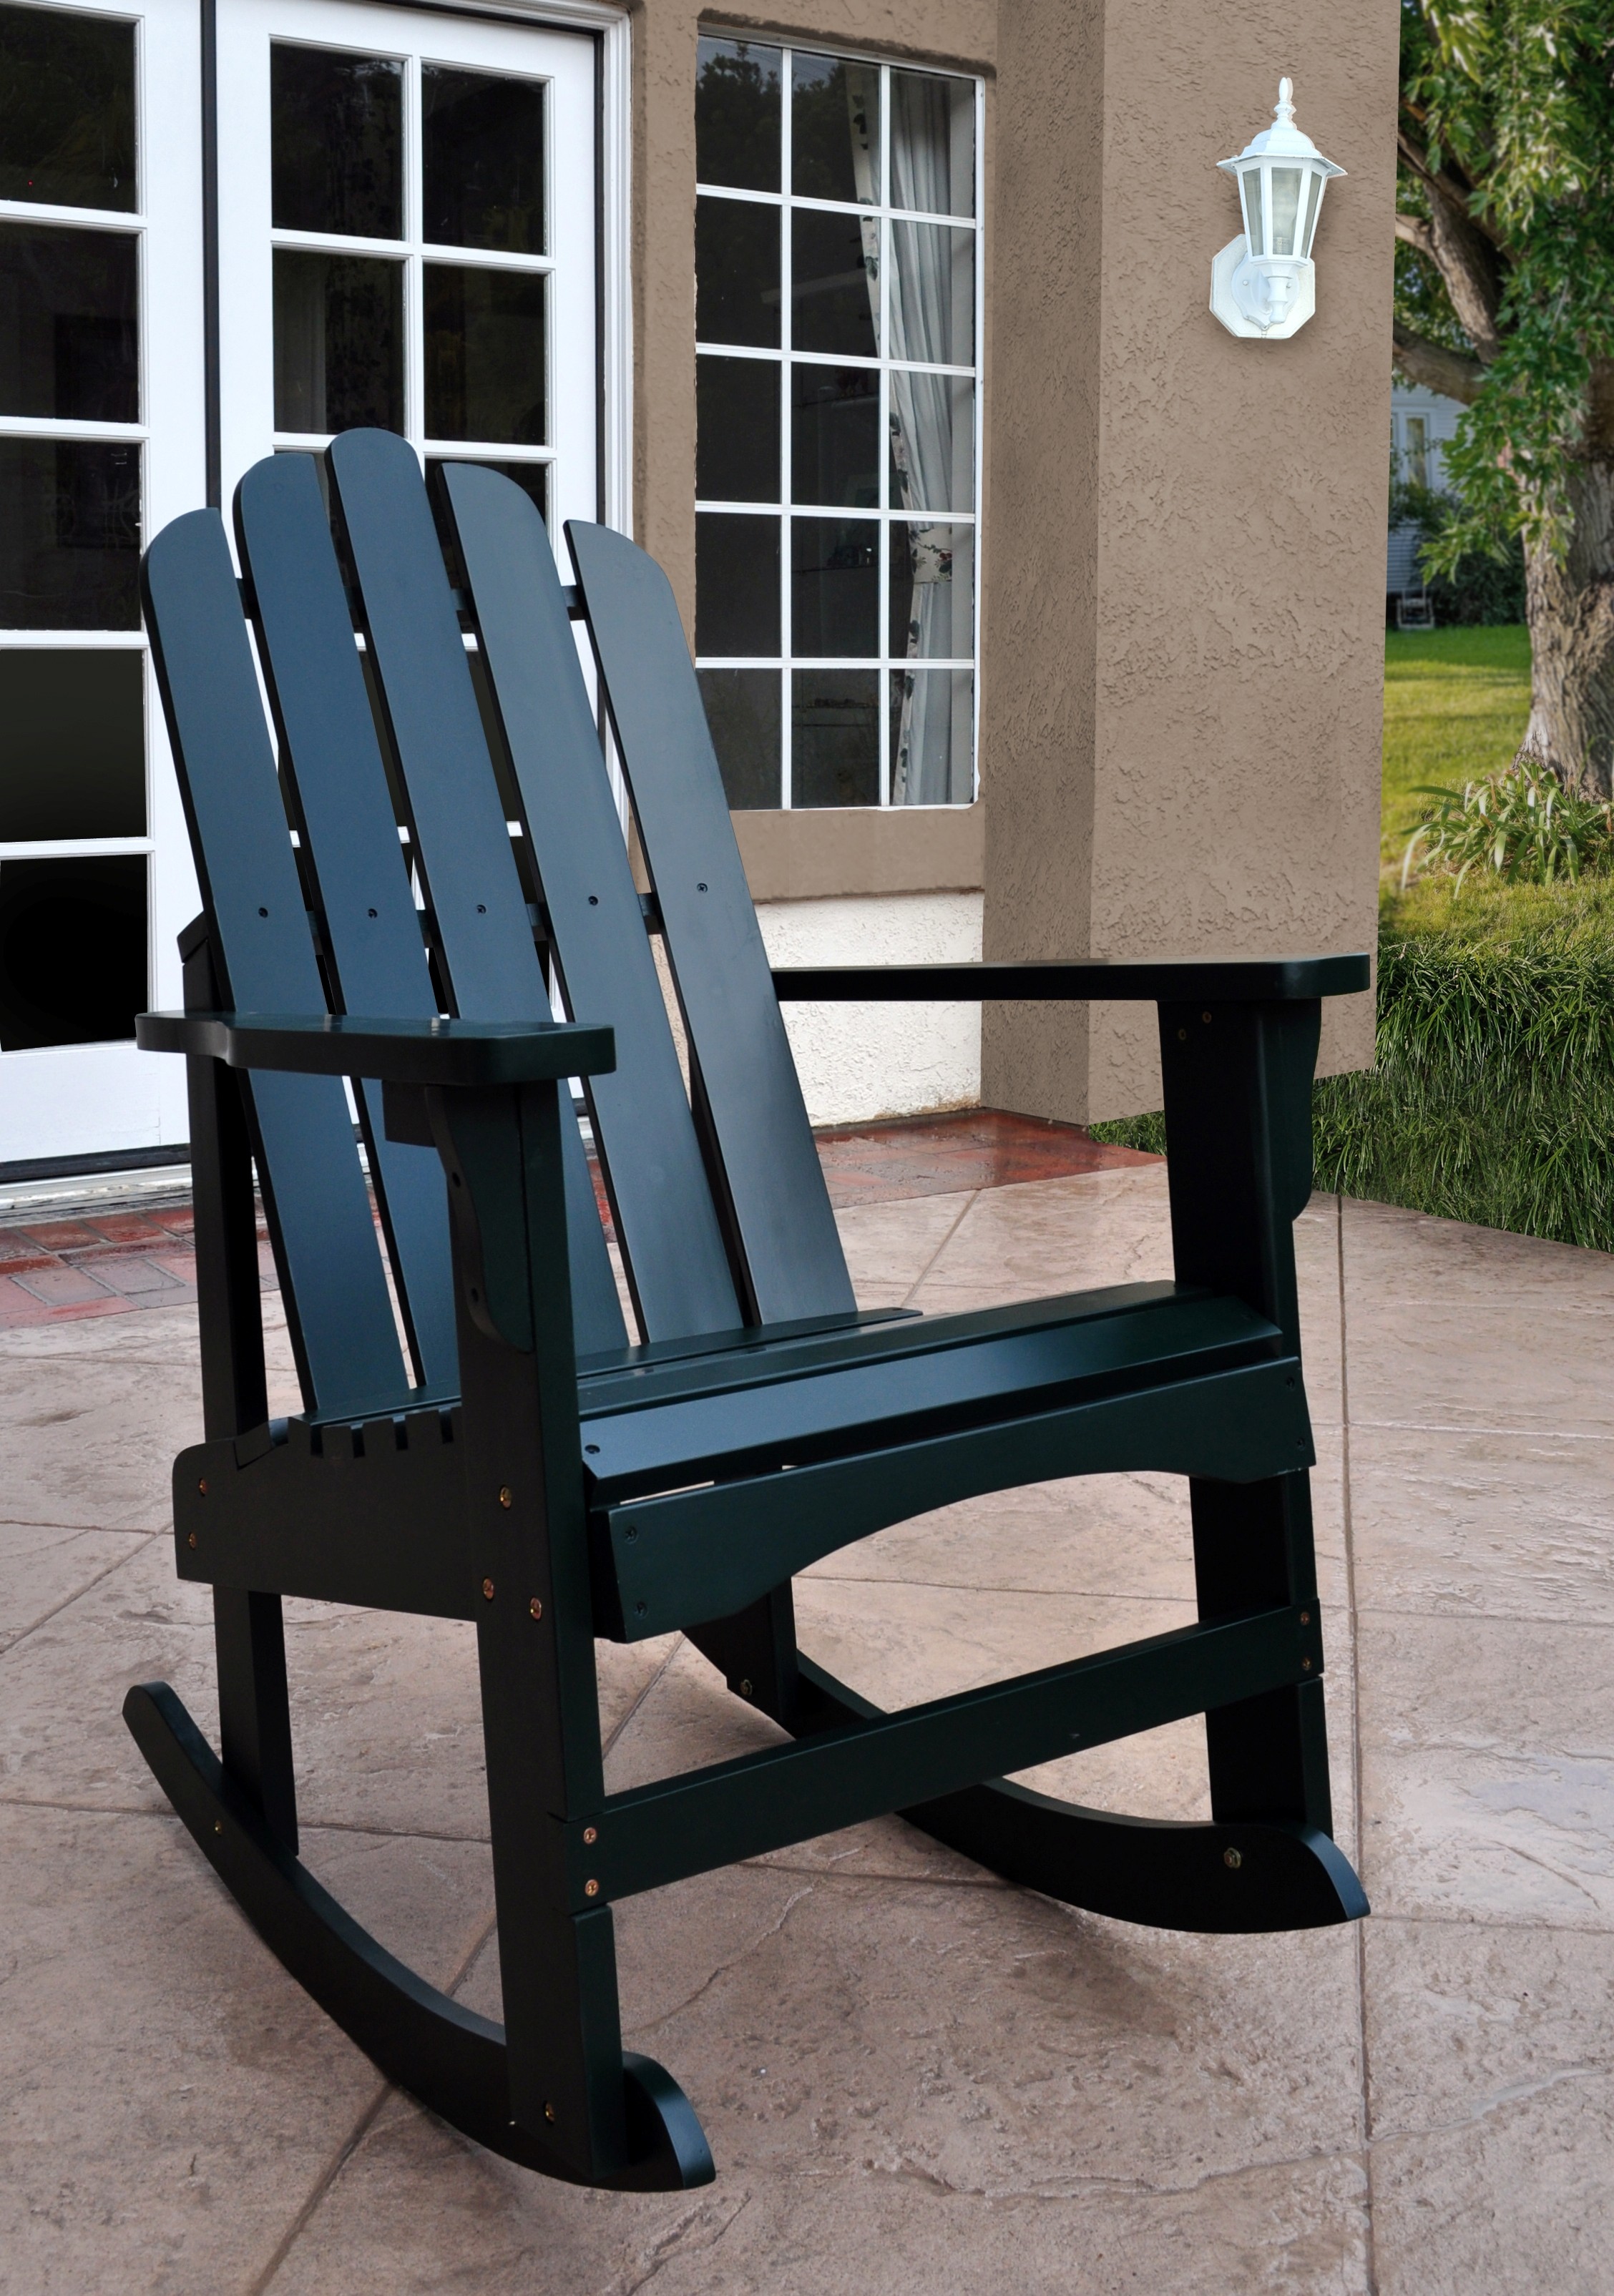 Benefits Of Having A Rocking Chair At Your Home